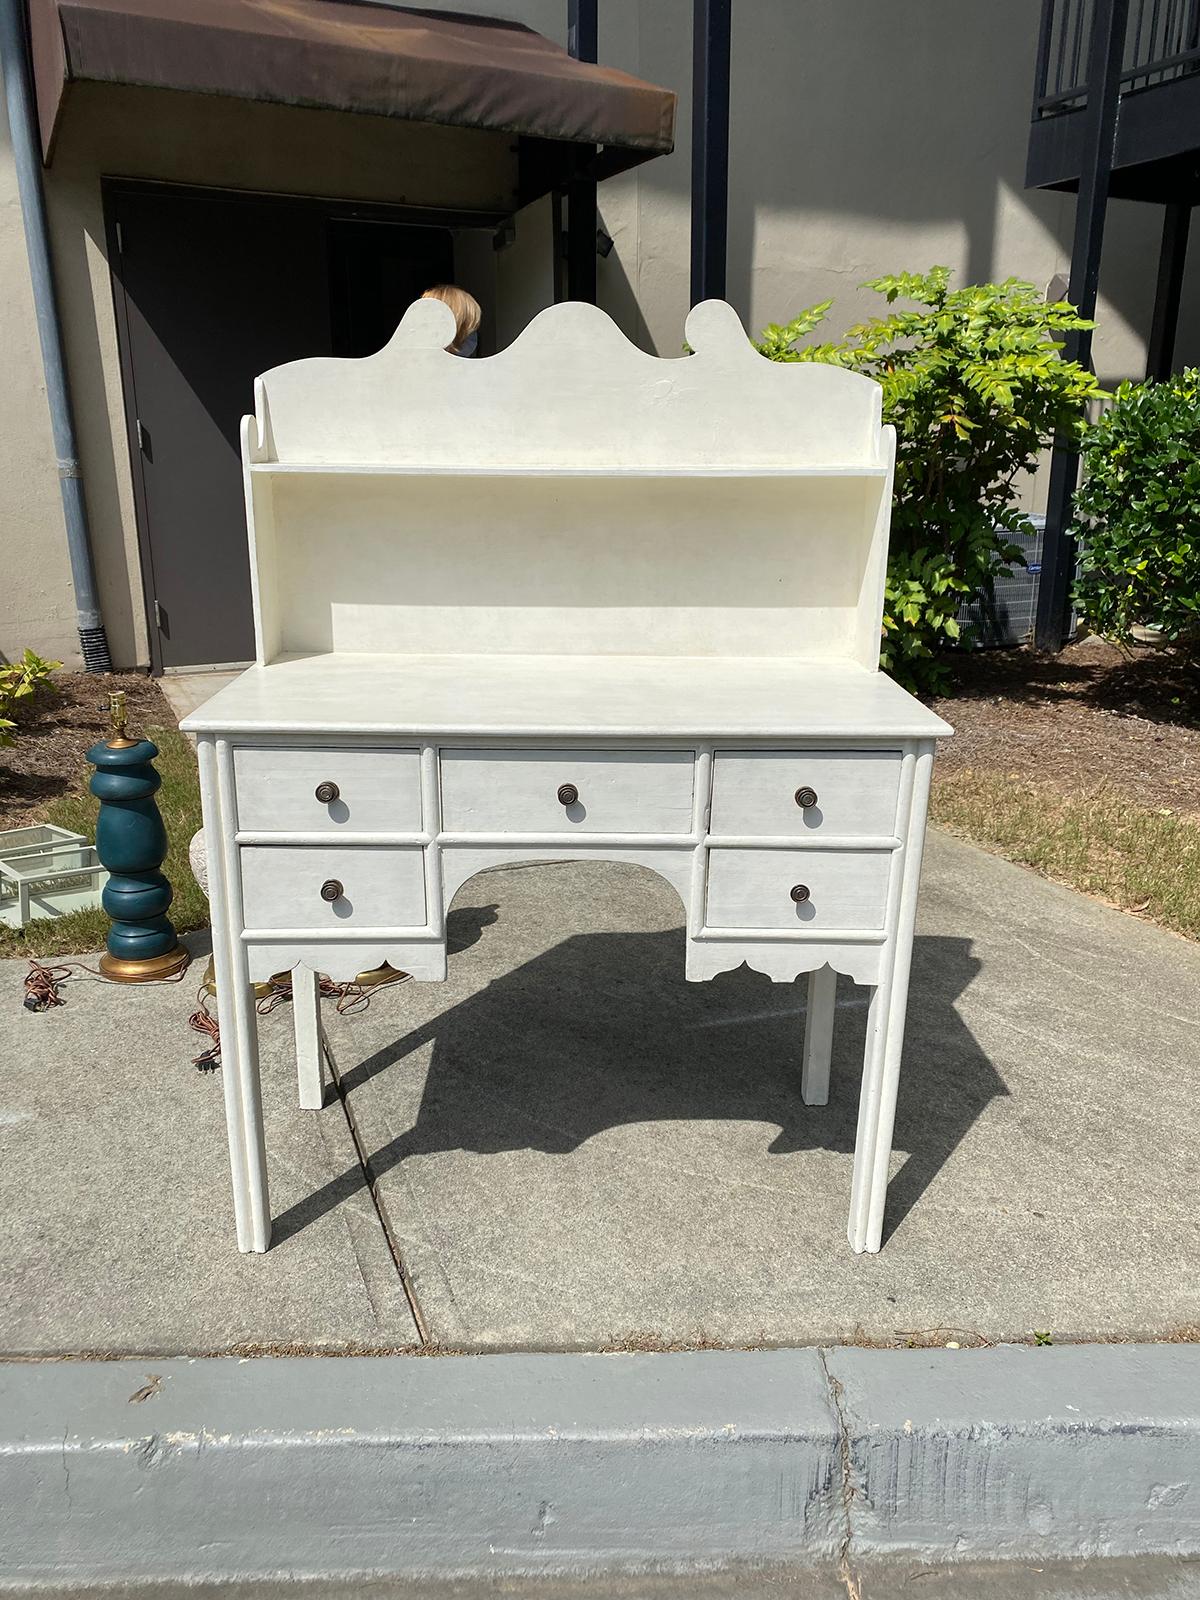 19th century English regency style painted desk with custom hand painted finish
Measures: 38.5